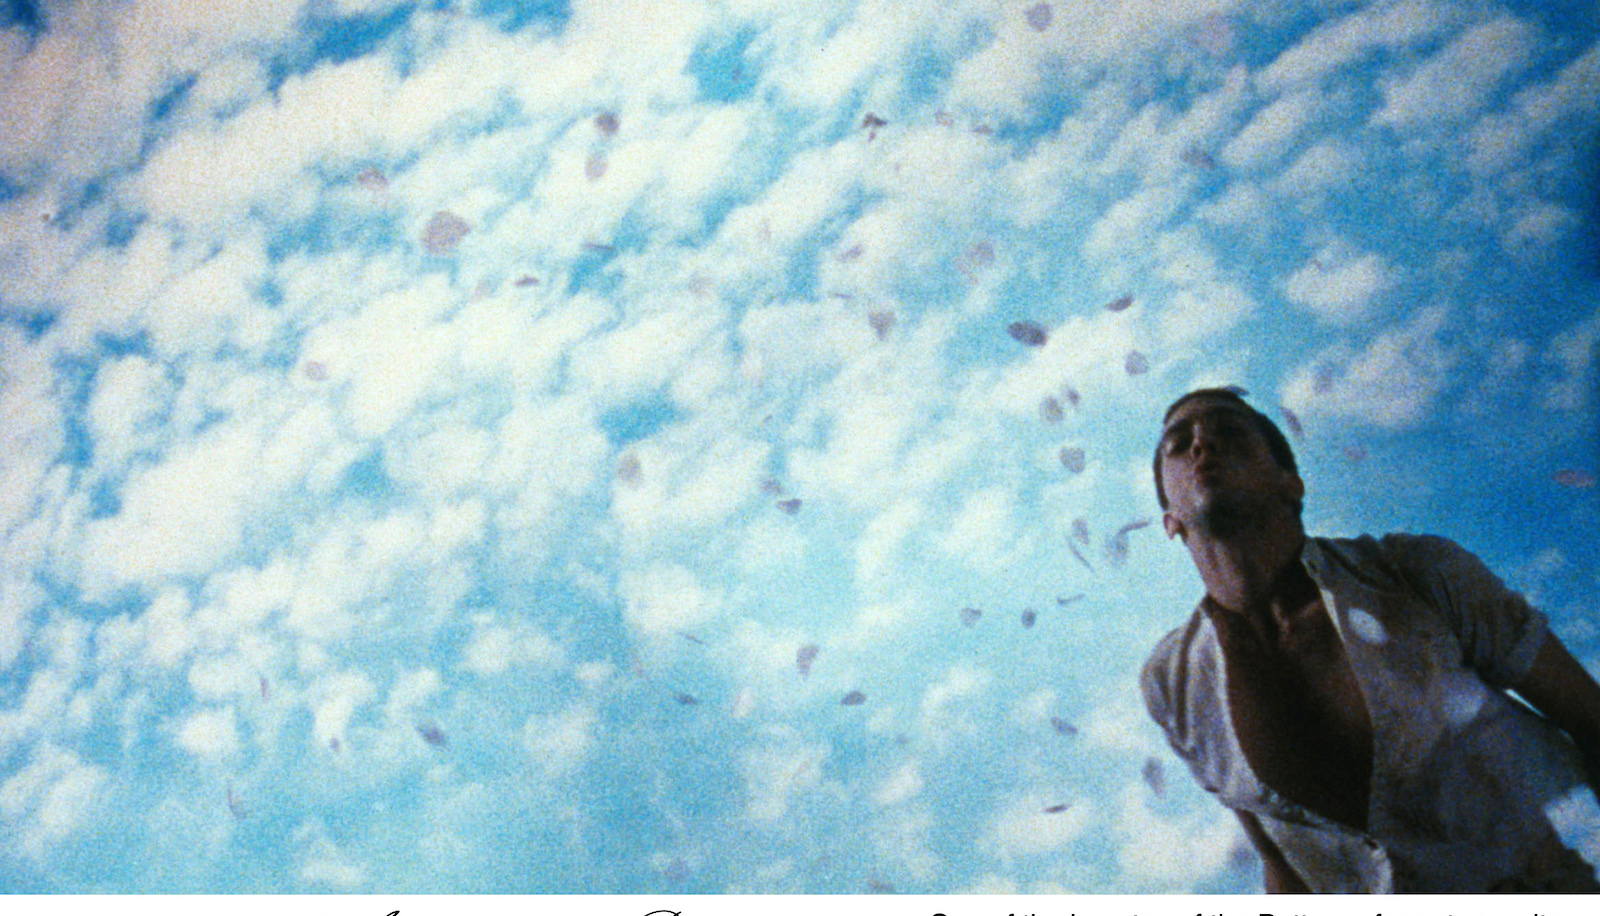 A man surrounded by floating flower petals against a blue sky